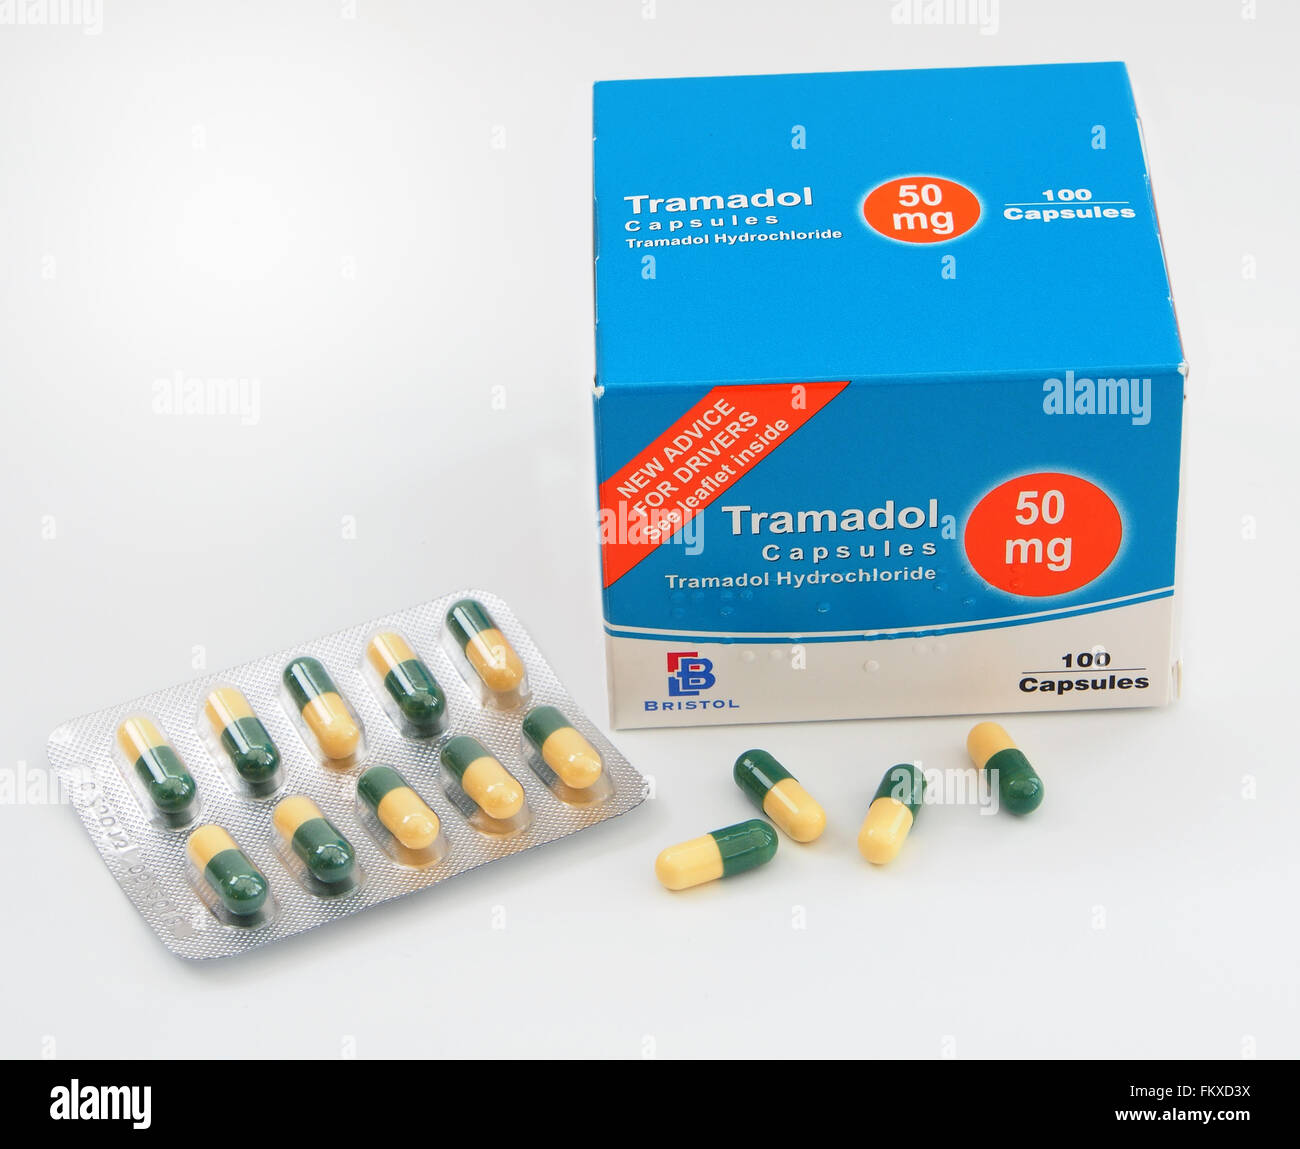 Tramadol white and blue capsule